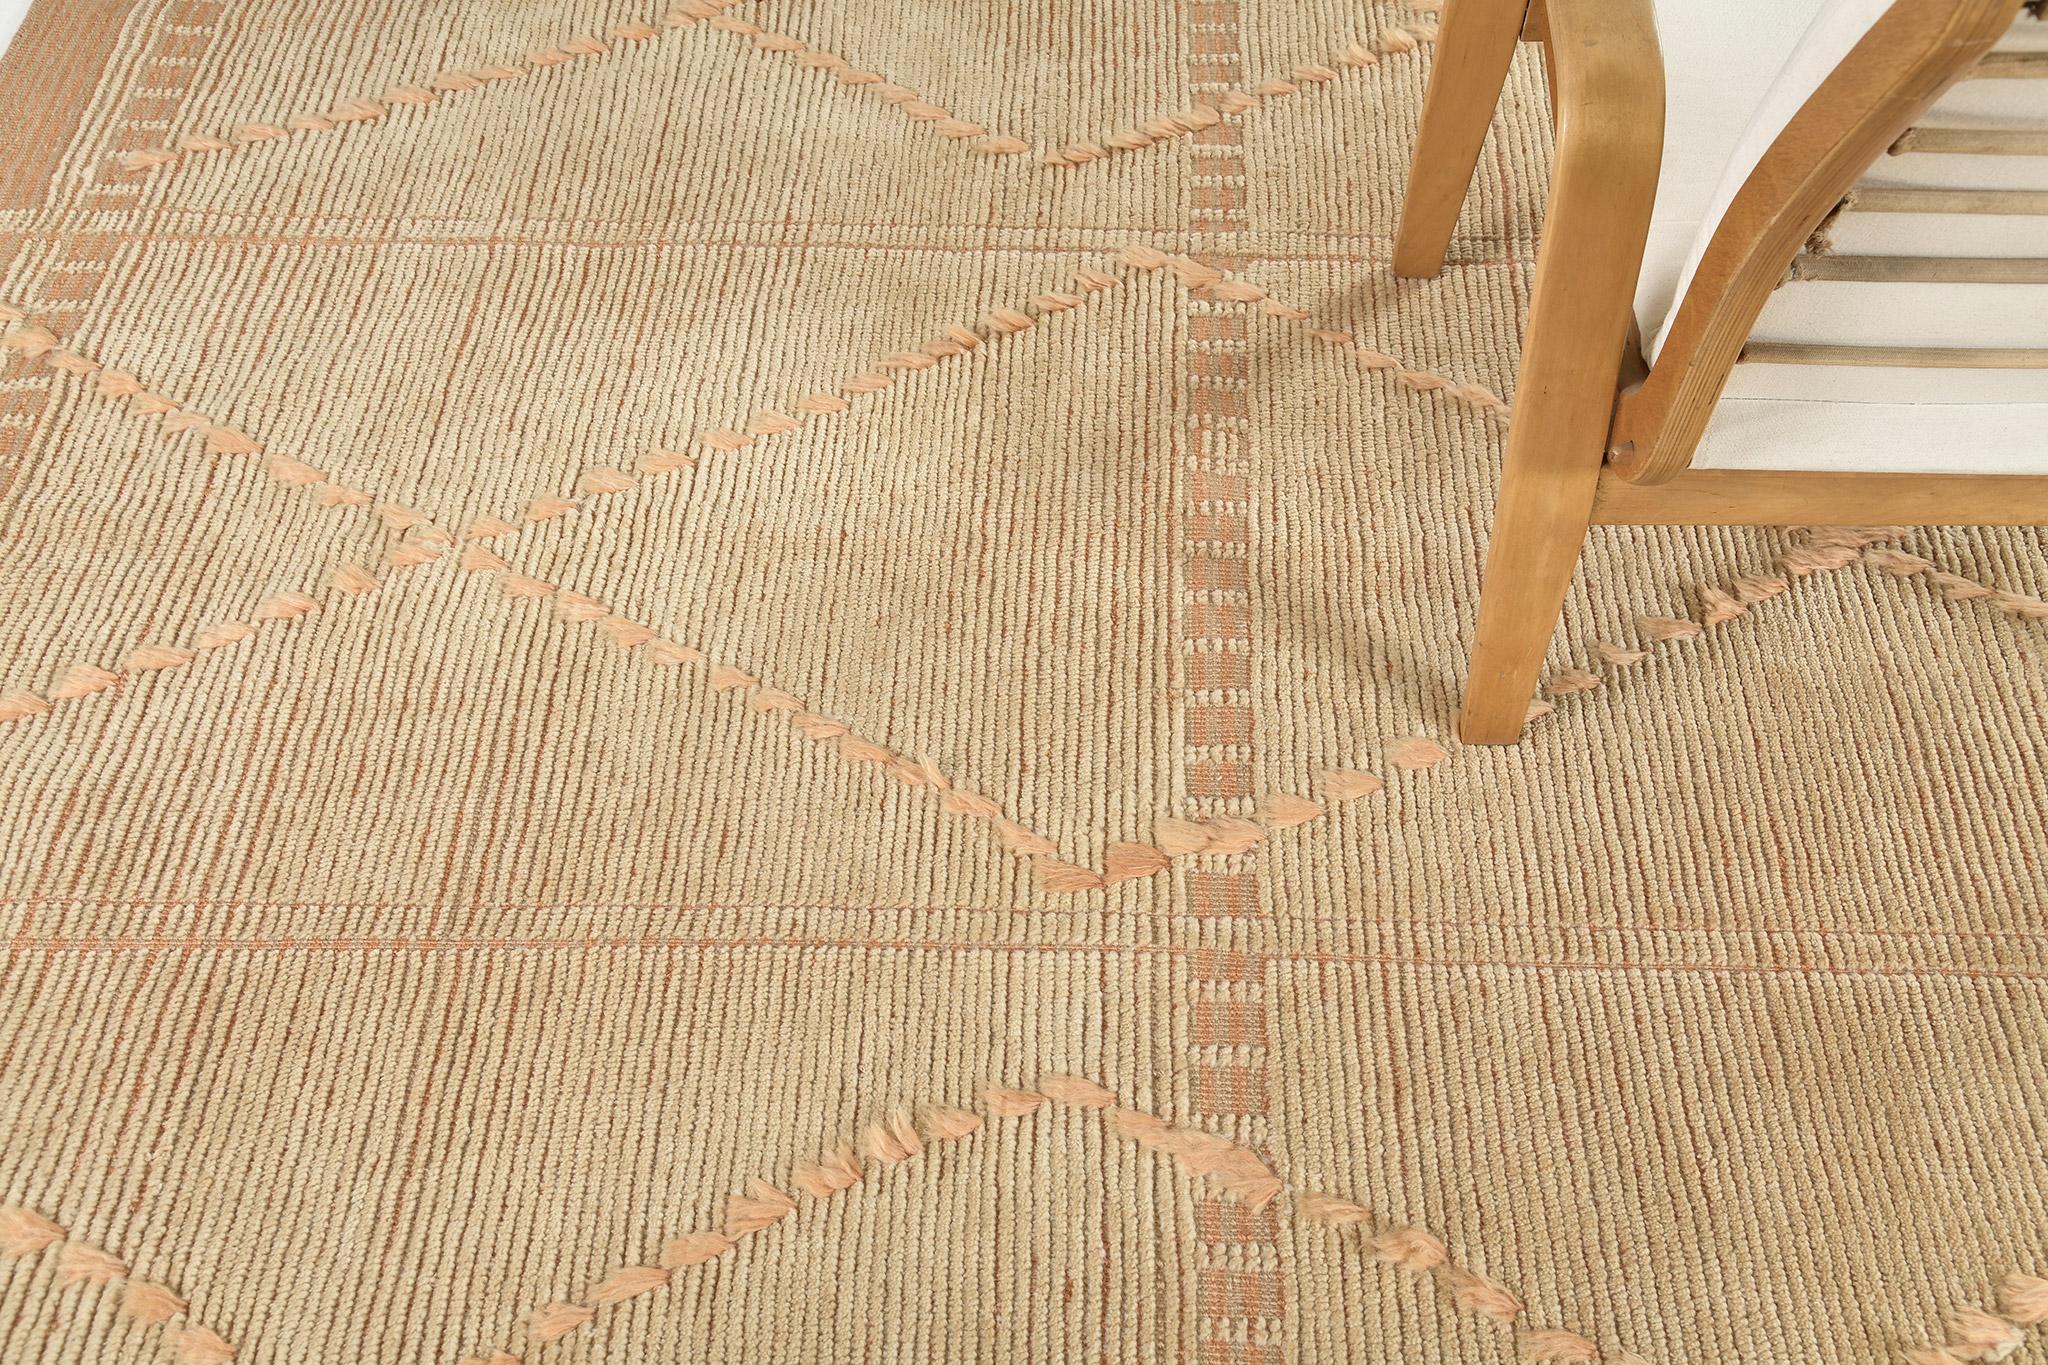 A Moroccan inspired design with formal resolve. Sangiovese's trim pile hosts a classic diamond trellis motif. Contrasting flatweave accents ground the composition.

Here in sunny apricot.

The Estancia Collection by Mehraban is a group of casually